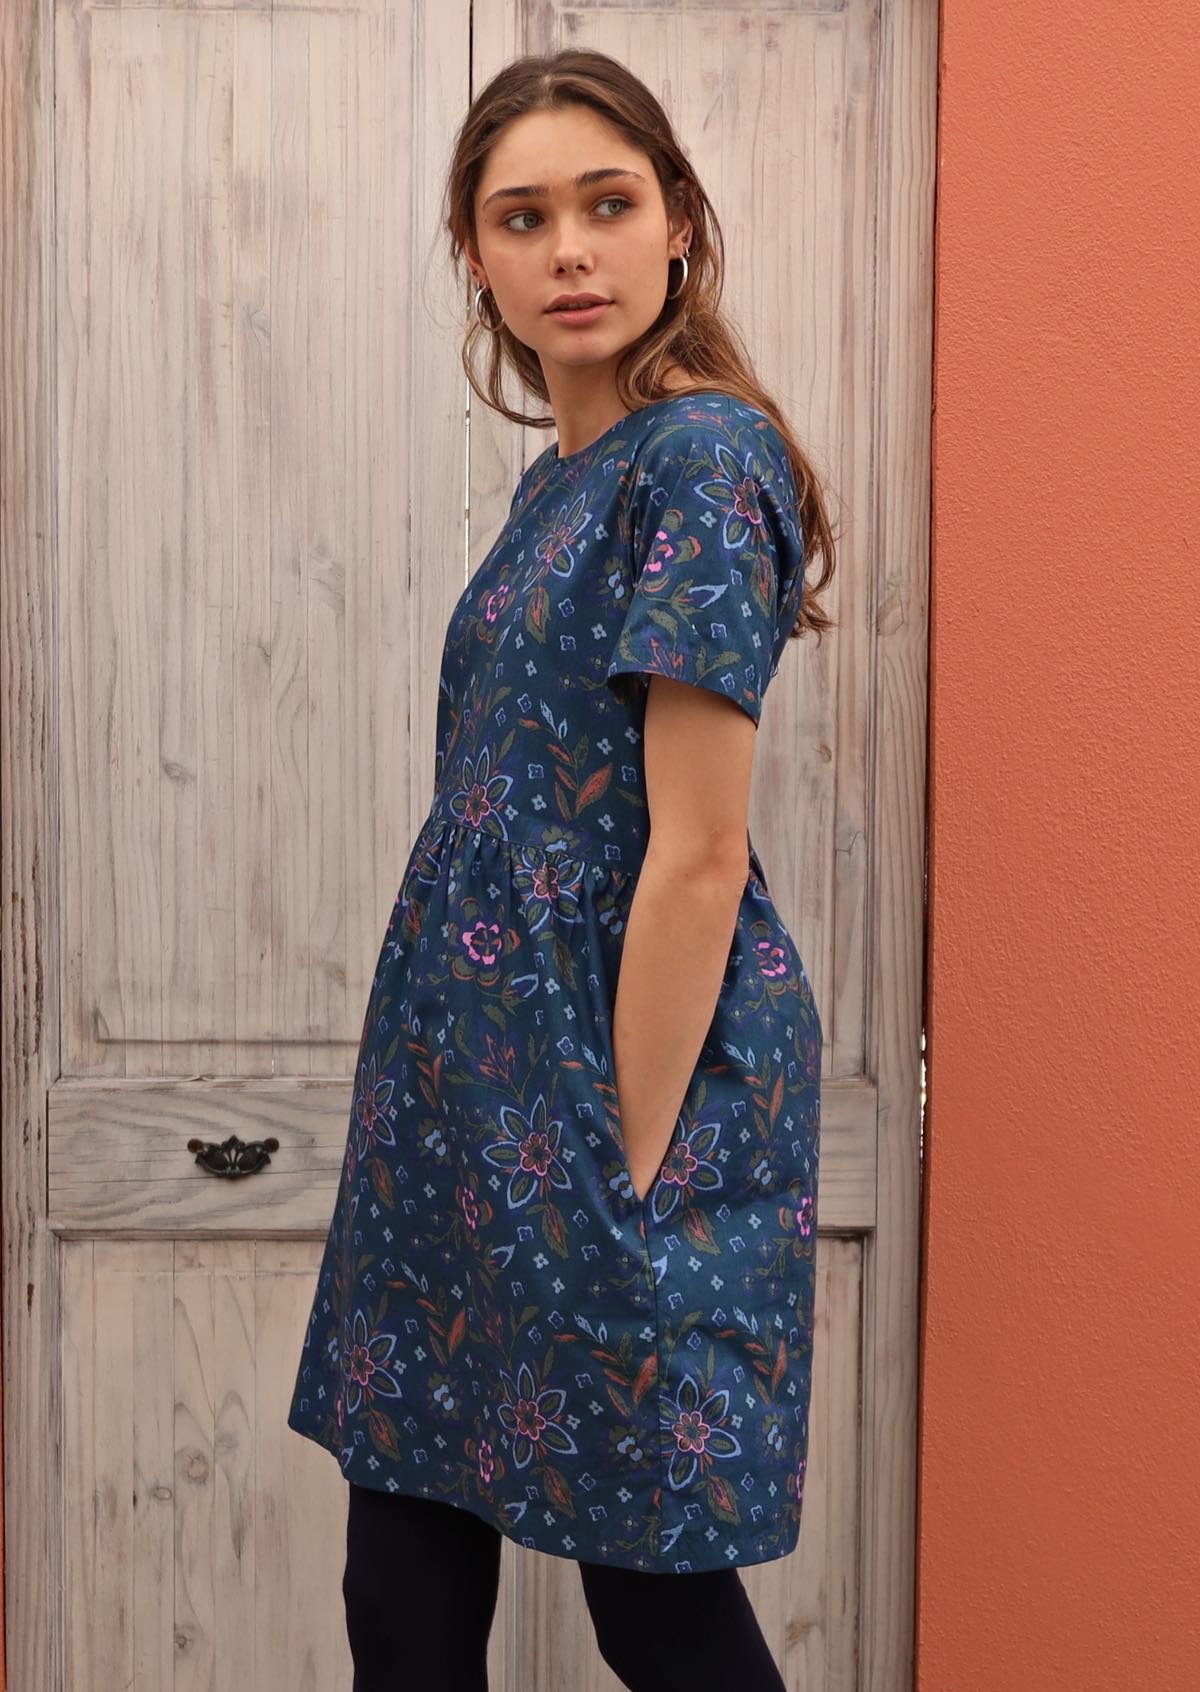 Model has her hands in the pockets of her relaxed fit 100% cotton dress. 